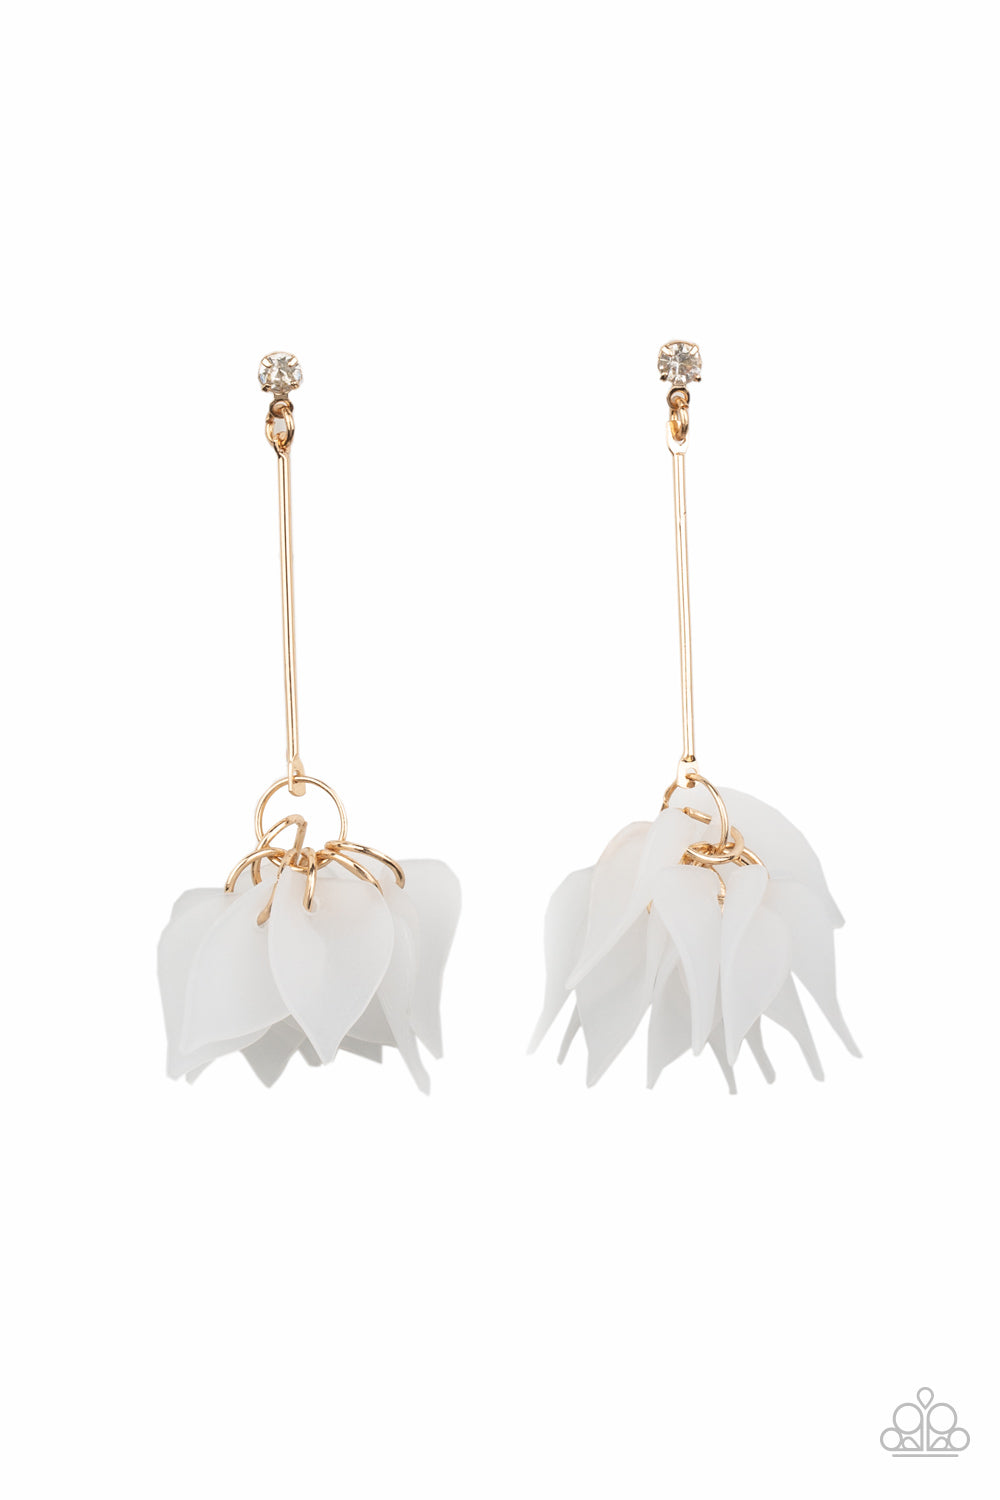 Paparazzi earrings a collection of curving white acrylic petals cluster.